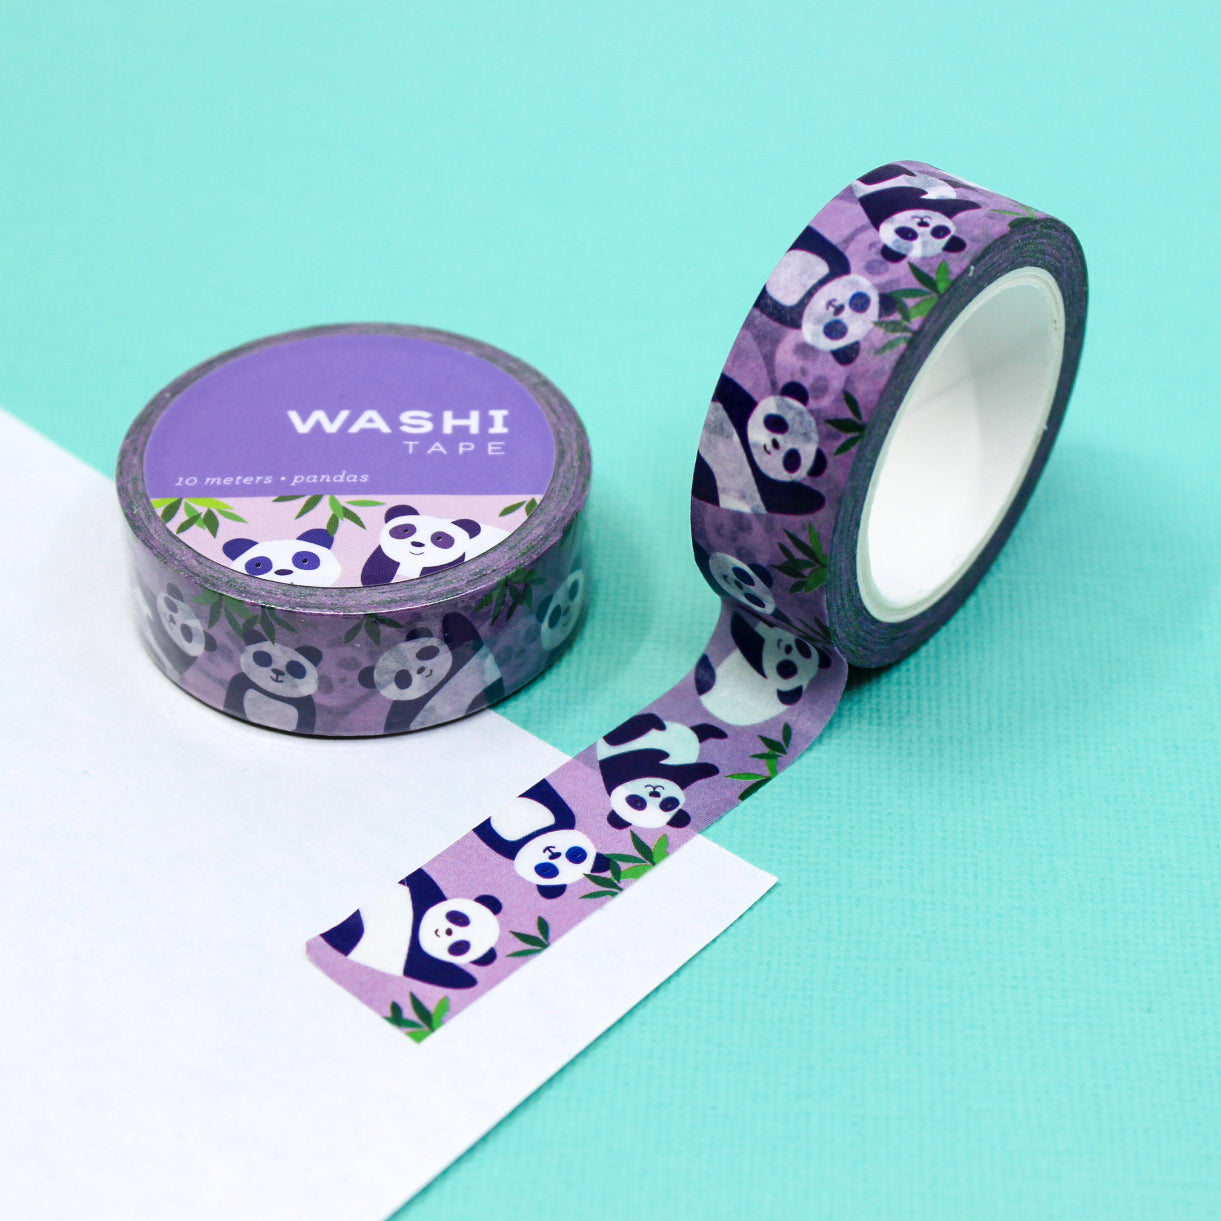 Elevate your crafts with our Purple Panda Bear Washi Tape, featuring adorable panda bear illustrations in shades of purple. Ideal for adding a cute and colorful touch to your projects. This tape from Girl of All Work is sold at BBB Supplies Craft Shop.